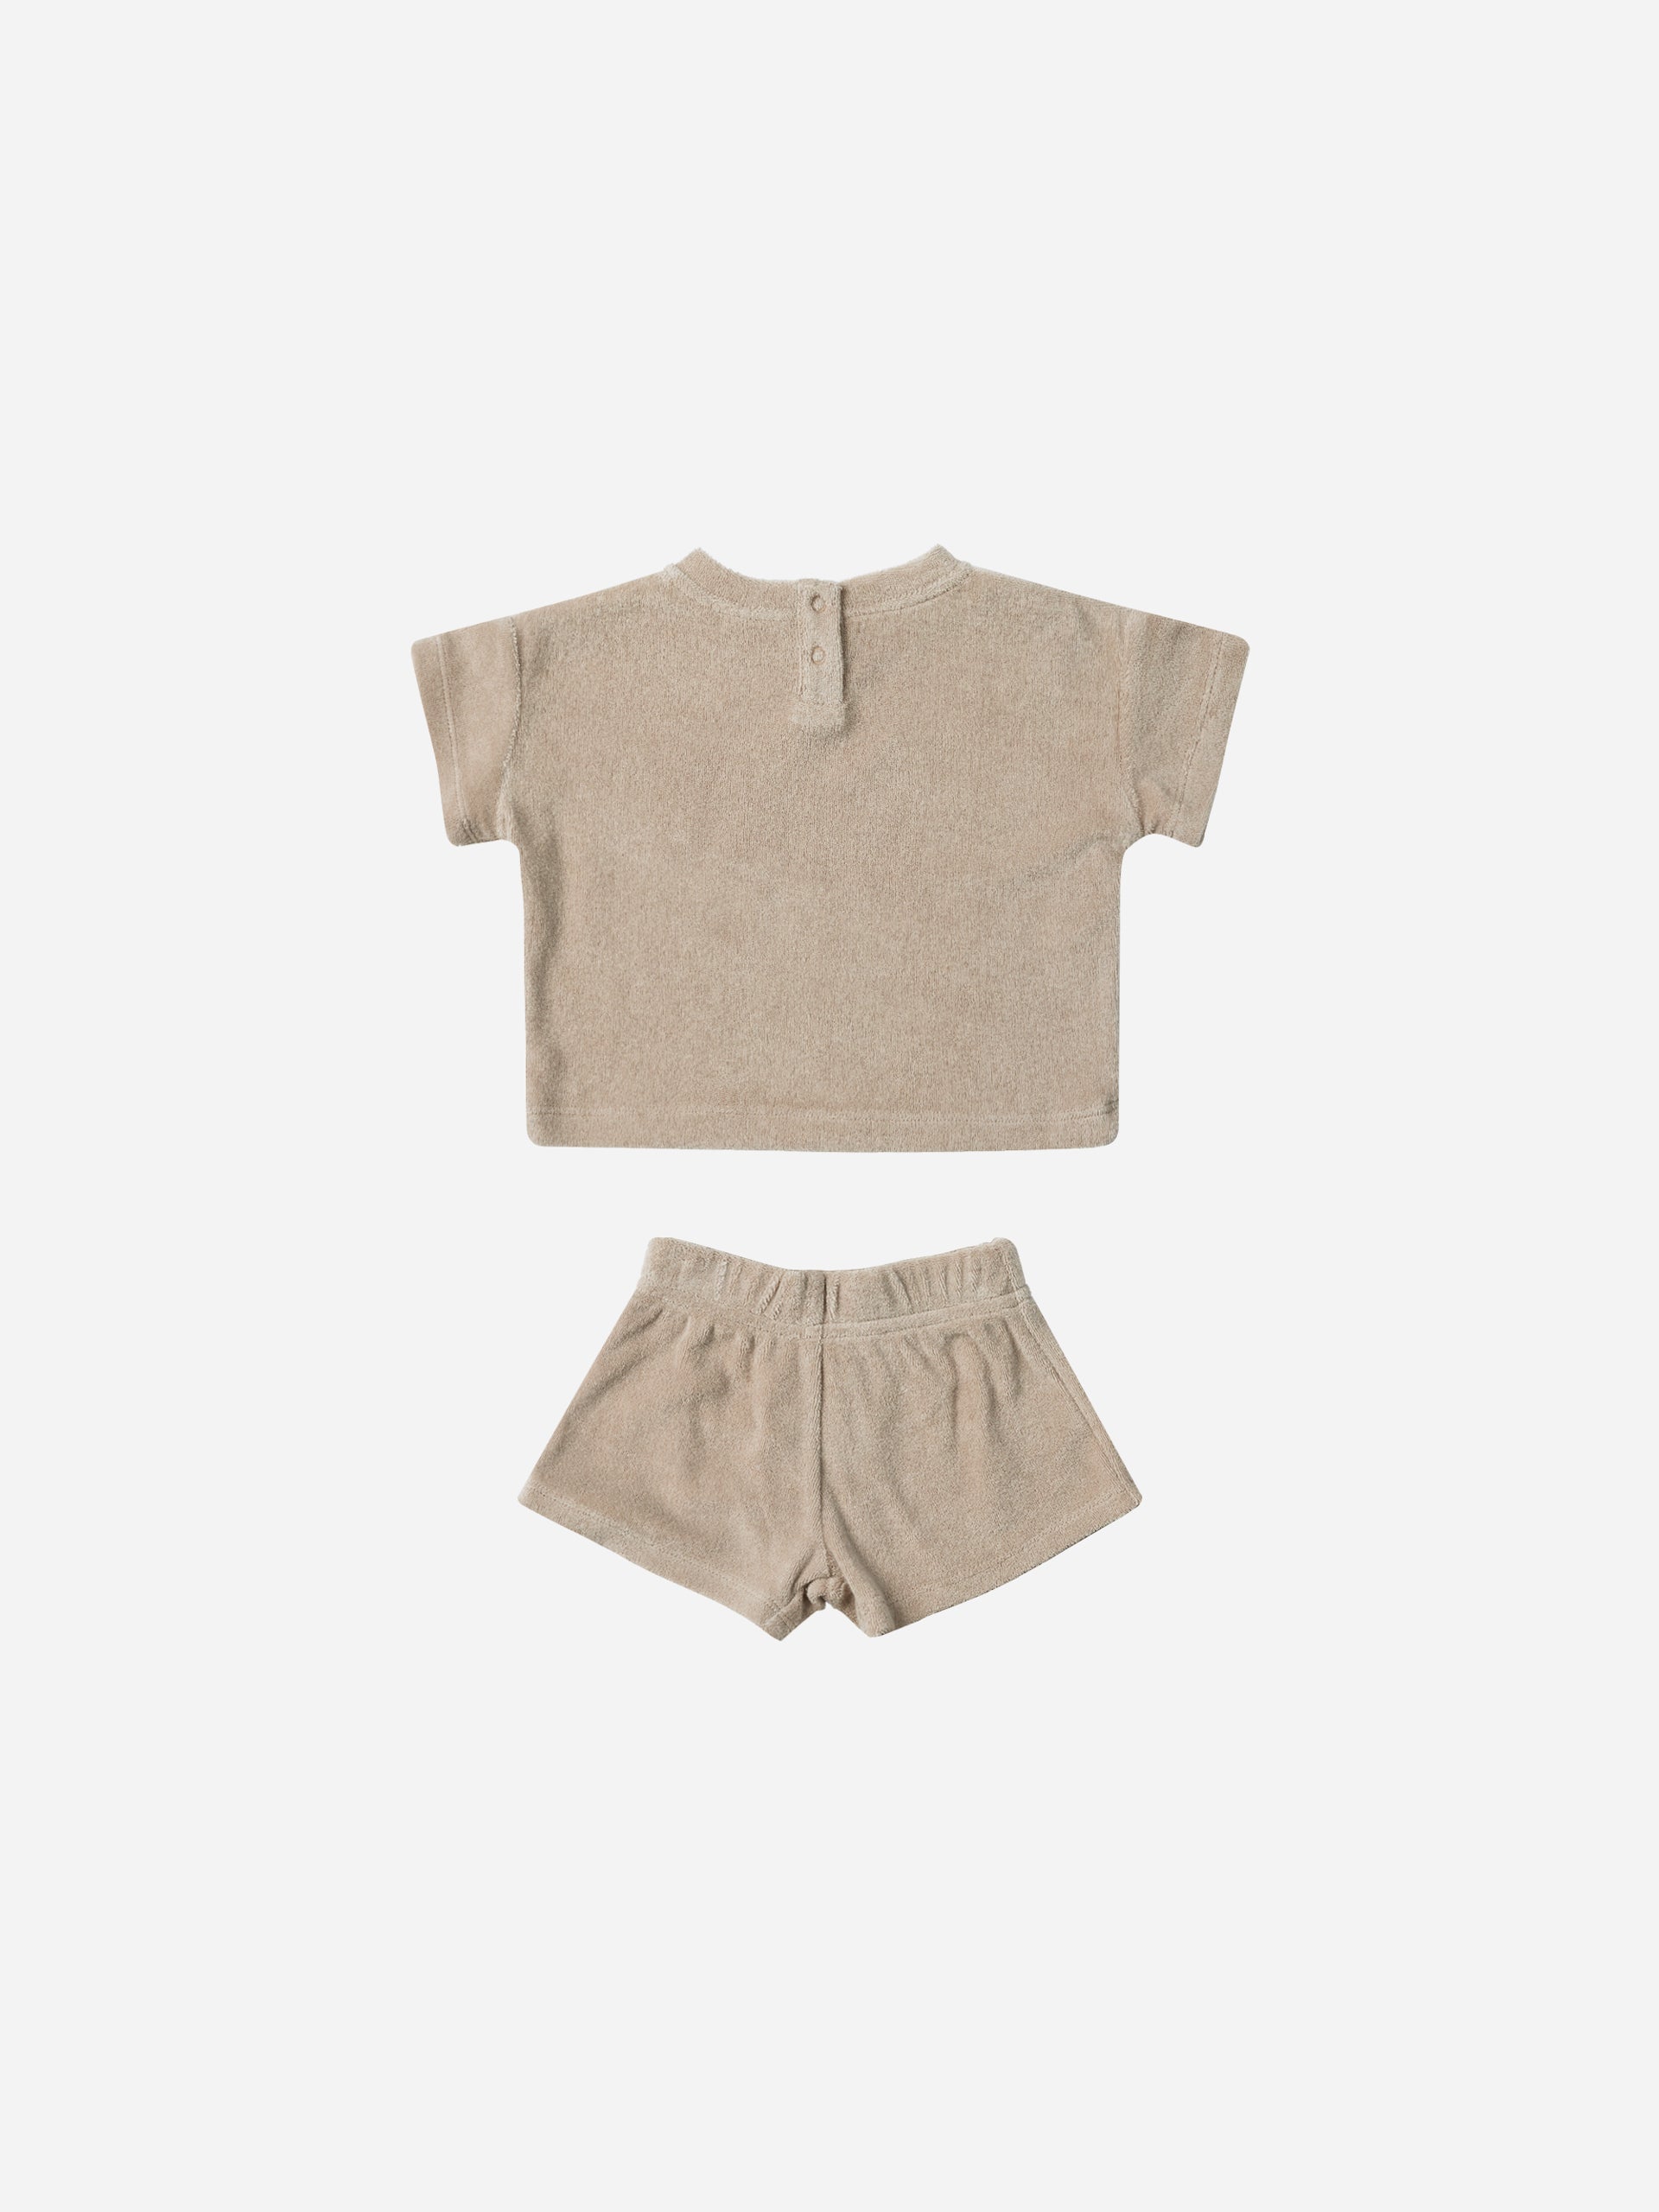 Terry Tee + Shorts Set || Oat - Rylee + Cru | Kids Clothes | Trendy Baby Clothes | Modern Infant Outfits |